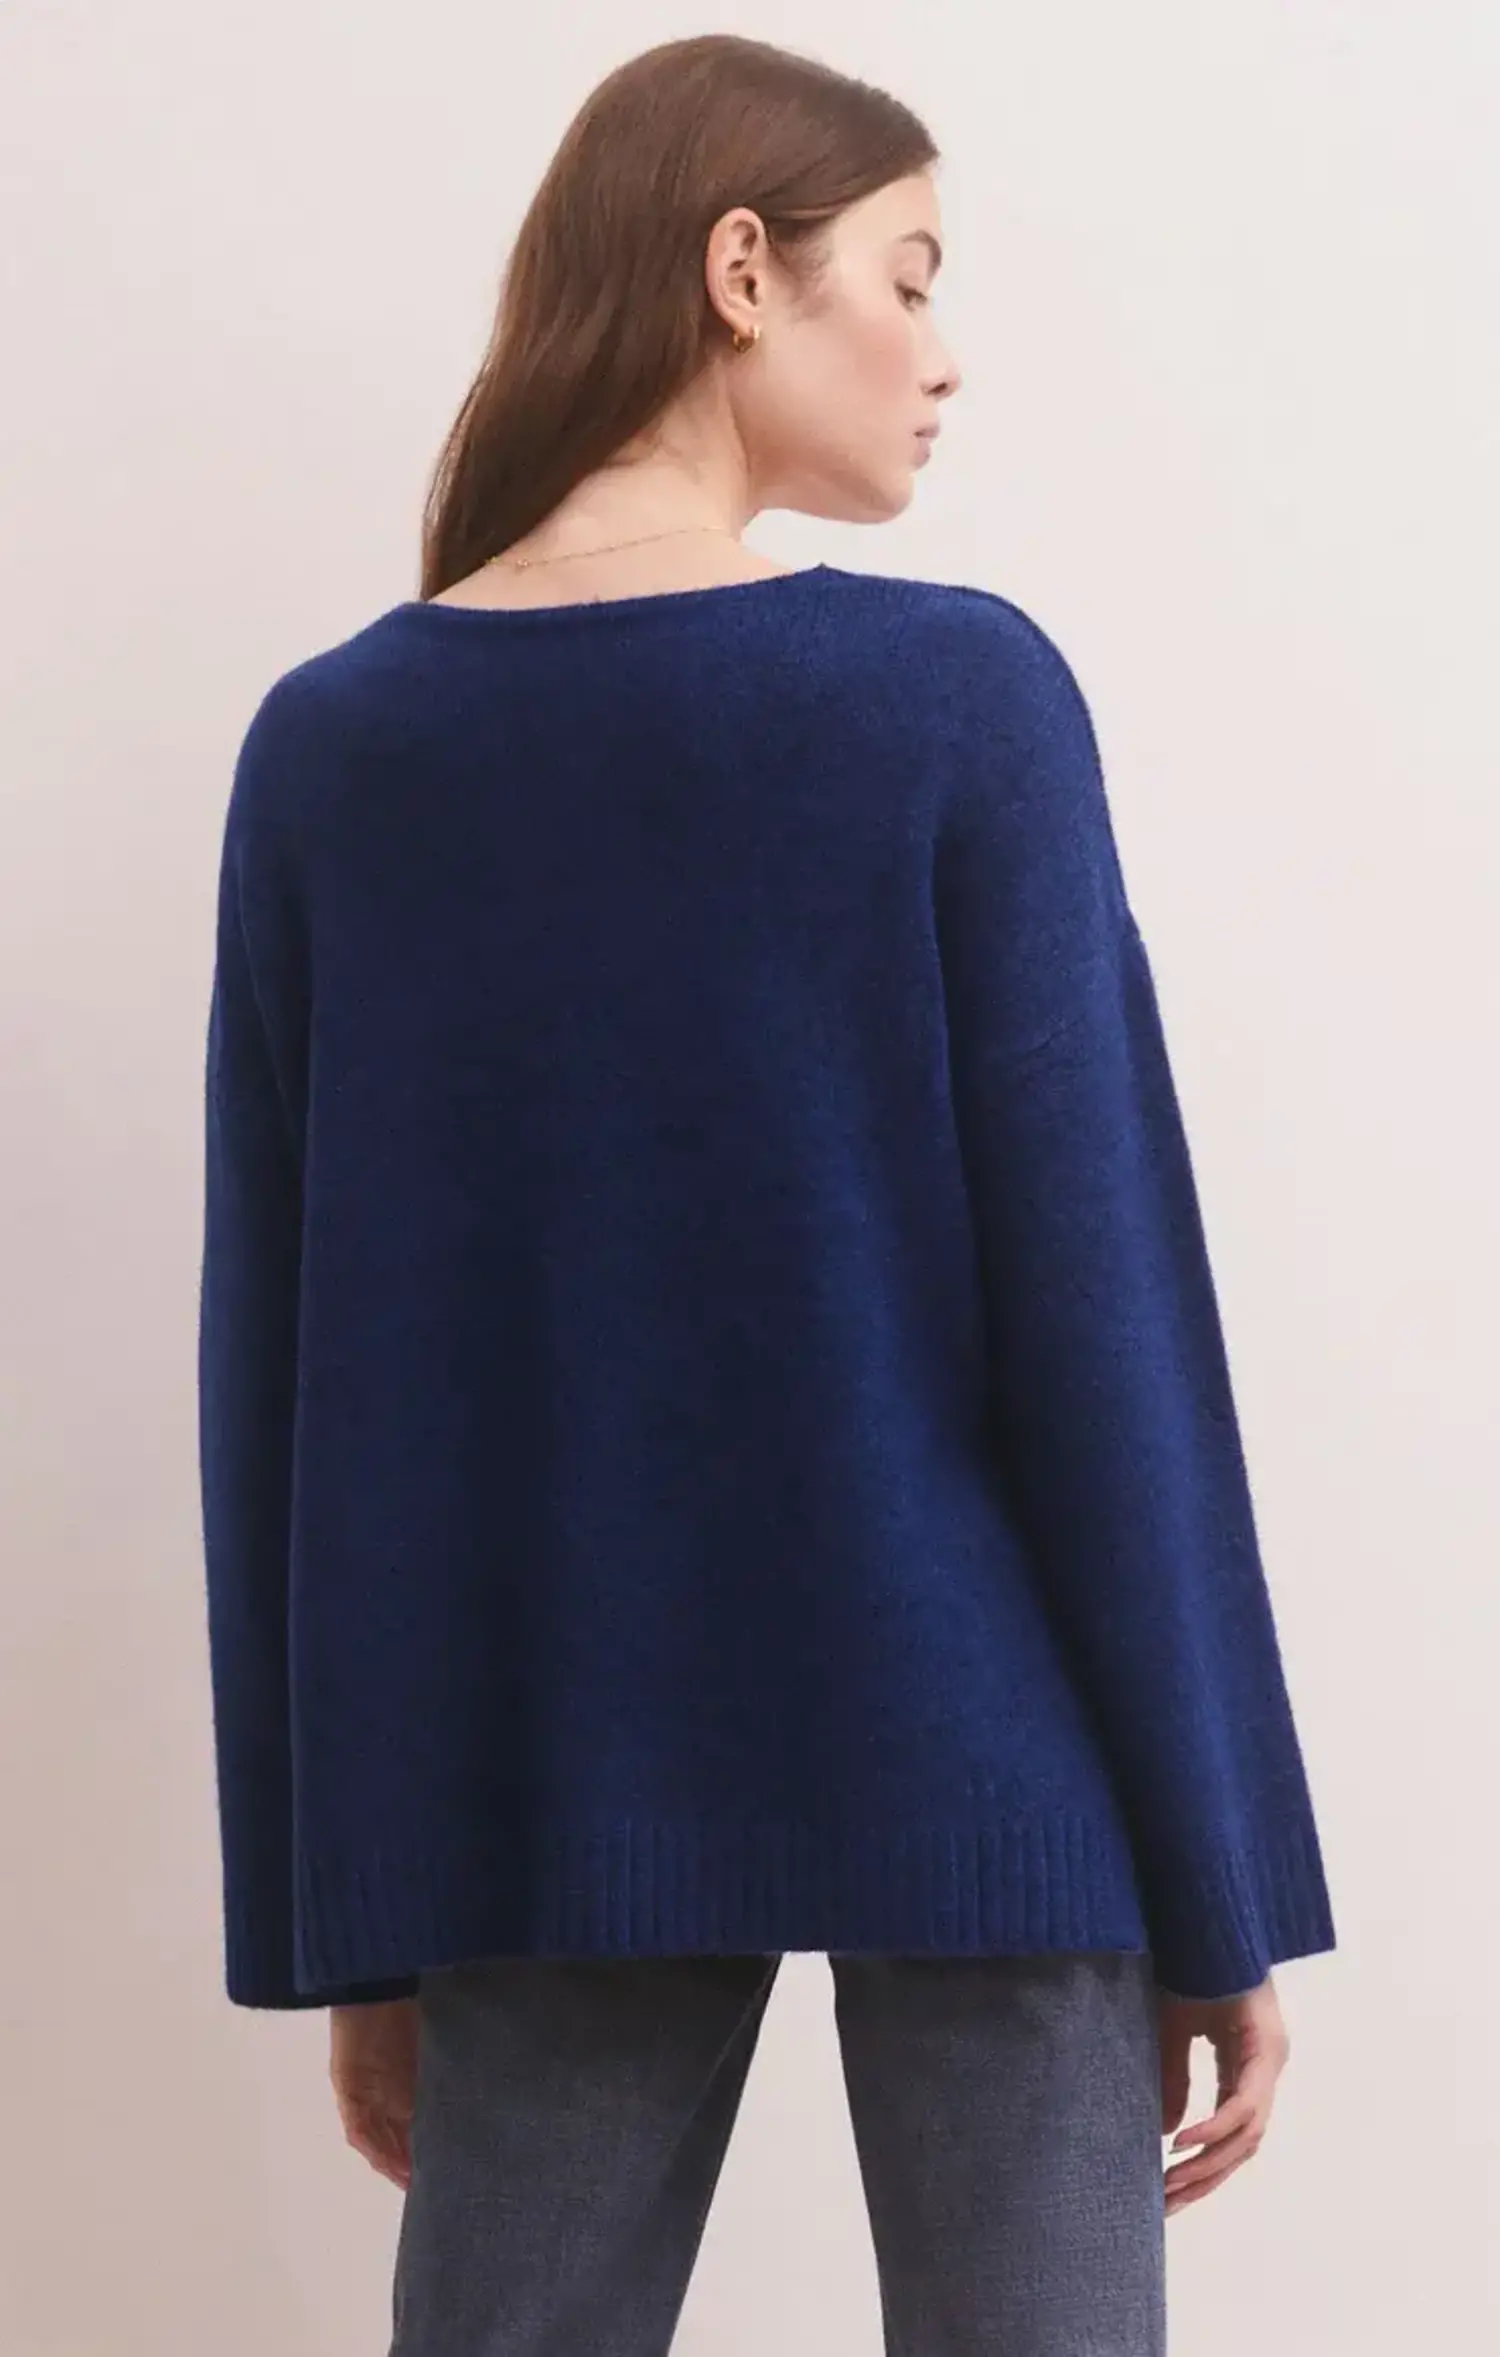 Modern Sweater Space Blue - The District On Main